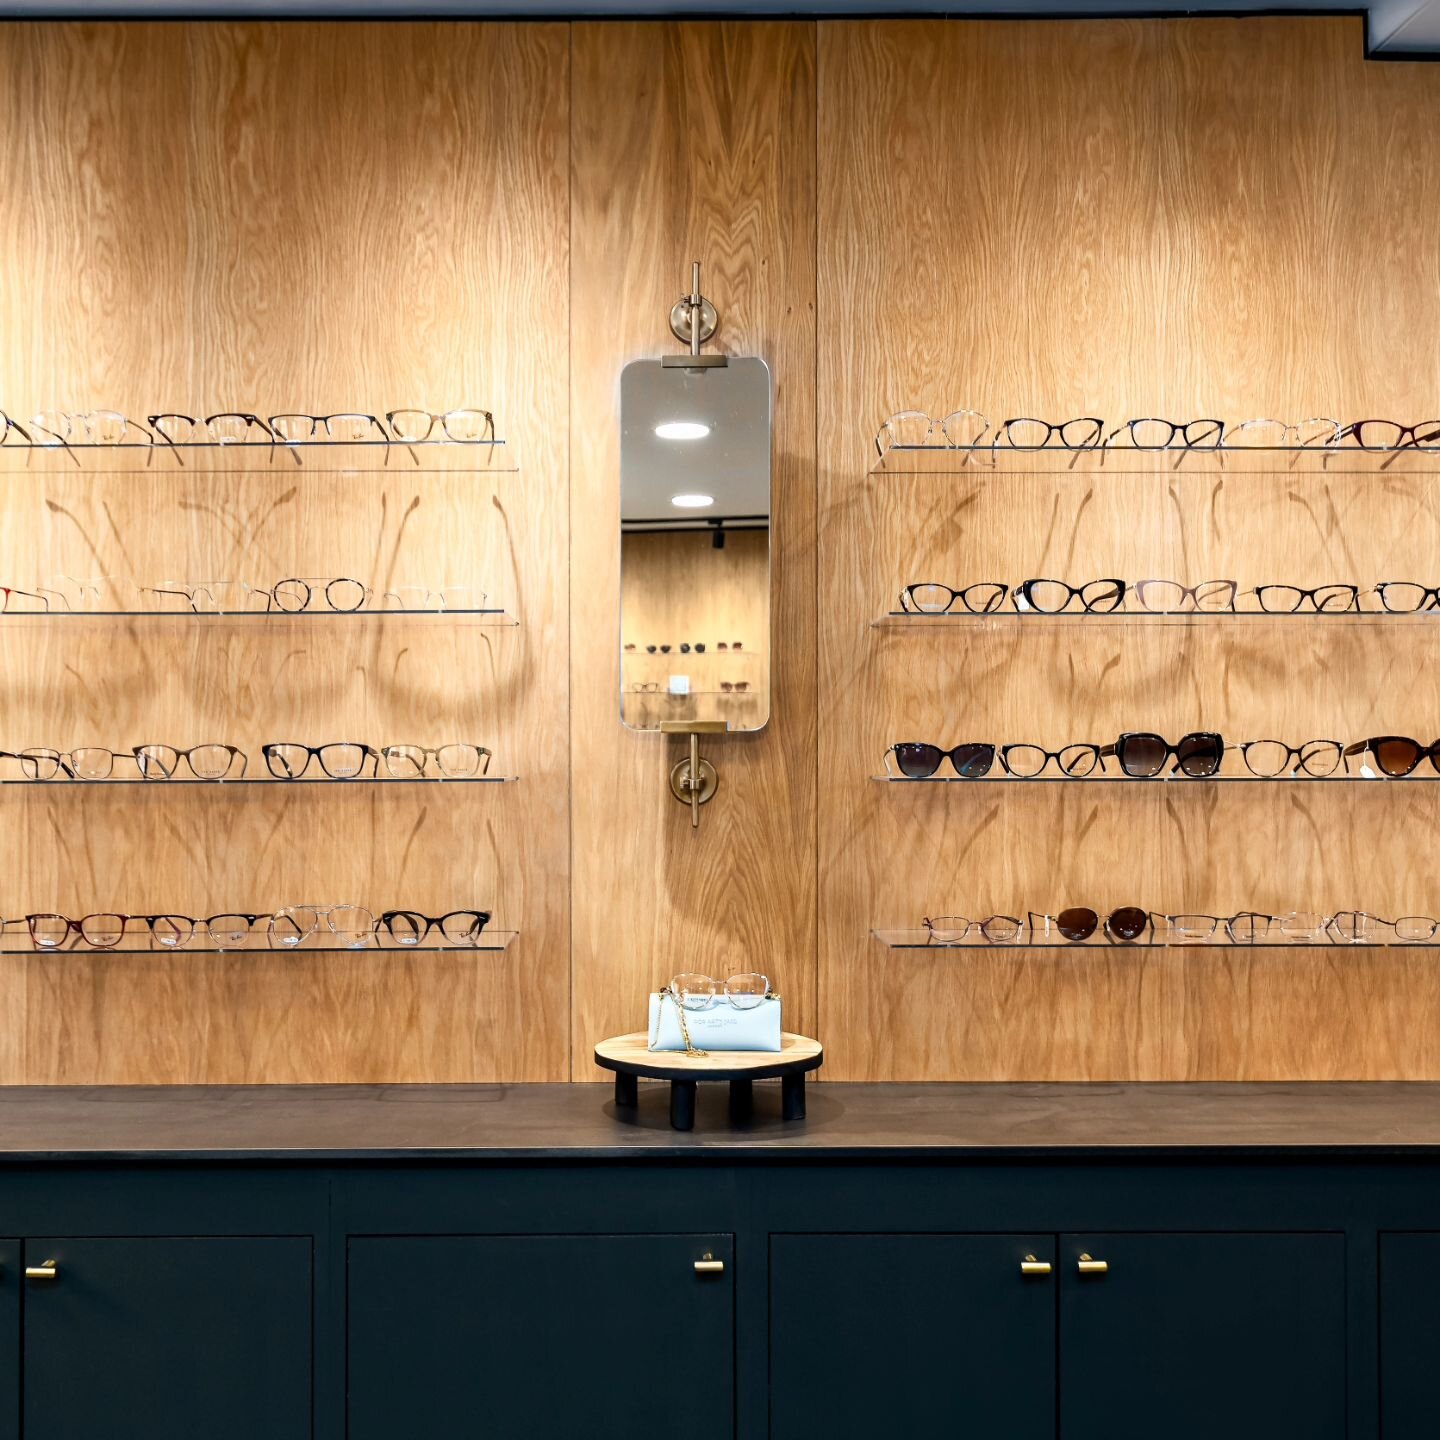 Interior Design Brilliance Meets Eyecare Elegance! 📸✨

Step into the captivating world of @sunstreetopticians where interior design finesse and eyecare elegance converge in a stunning photoshoot! 🏢👓

#opticians #opticianshop
#interiorphotoshoot #c